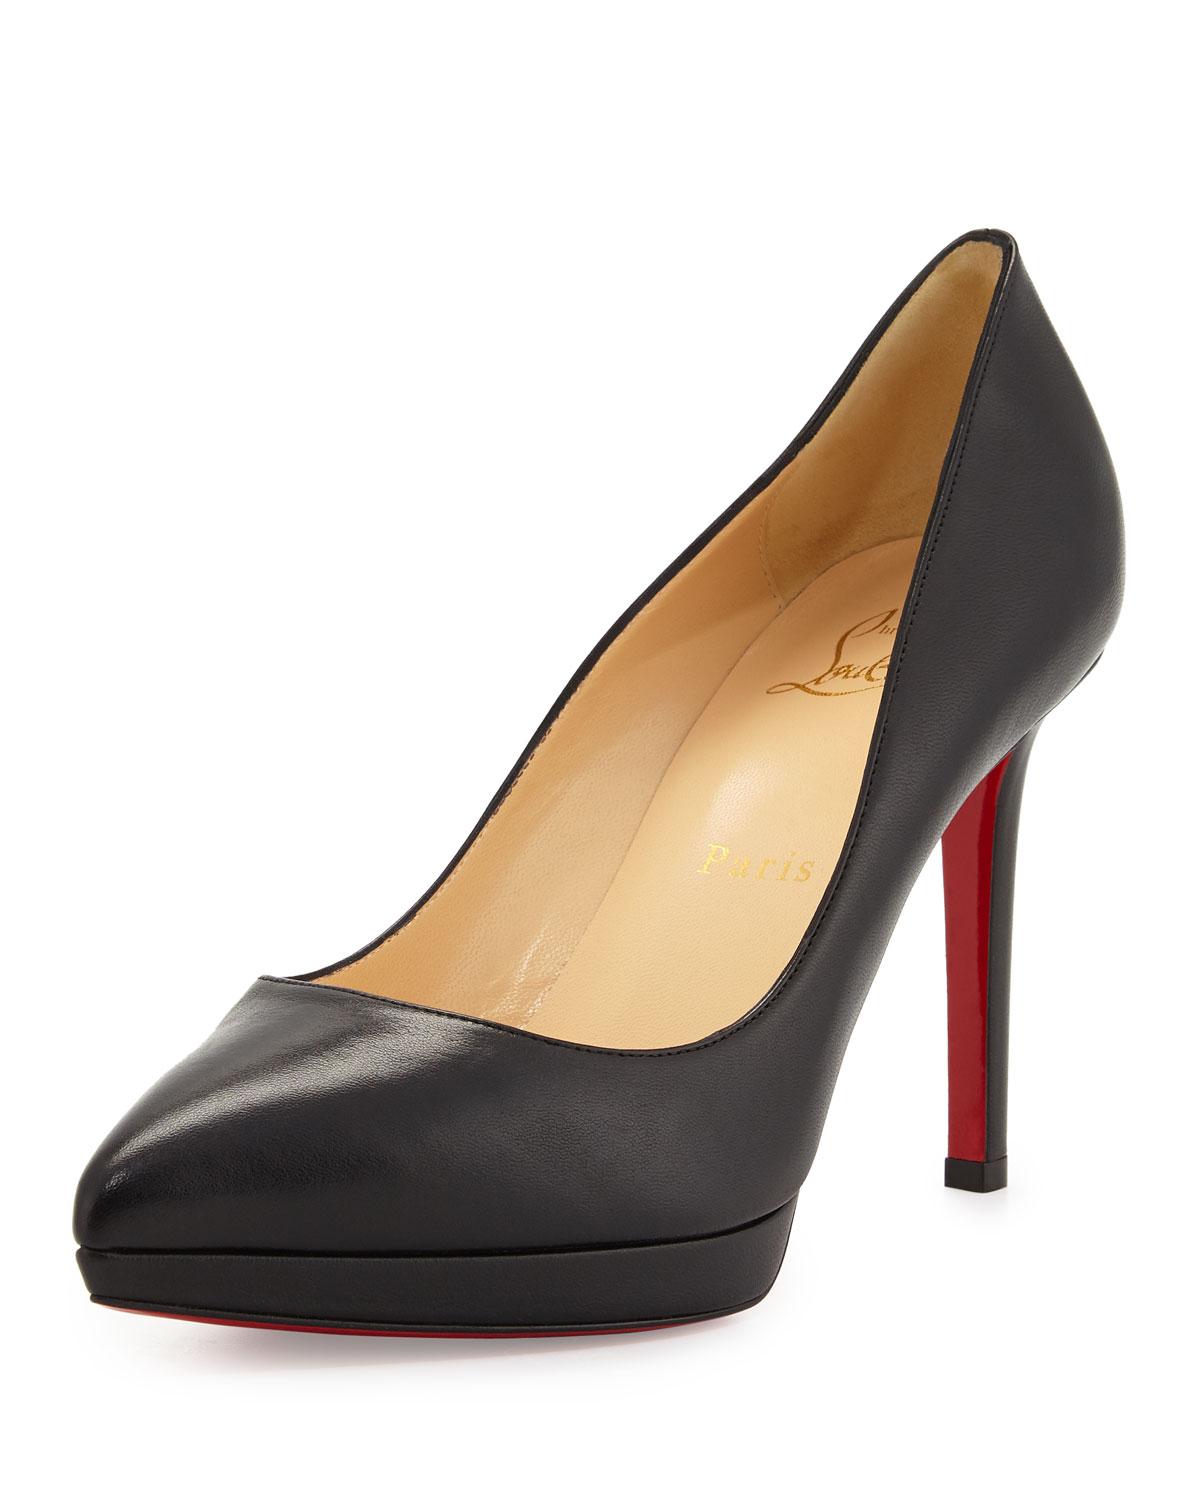 Christian Louboutin Pigalle Plato 100 Nappa Pump in Black - Lyst